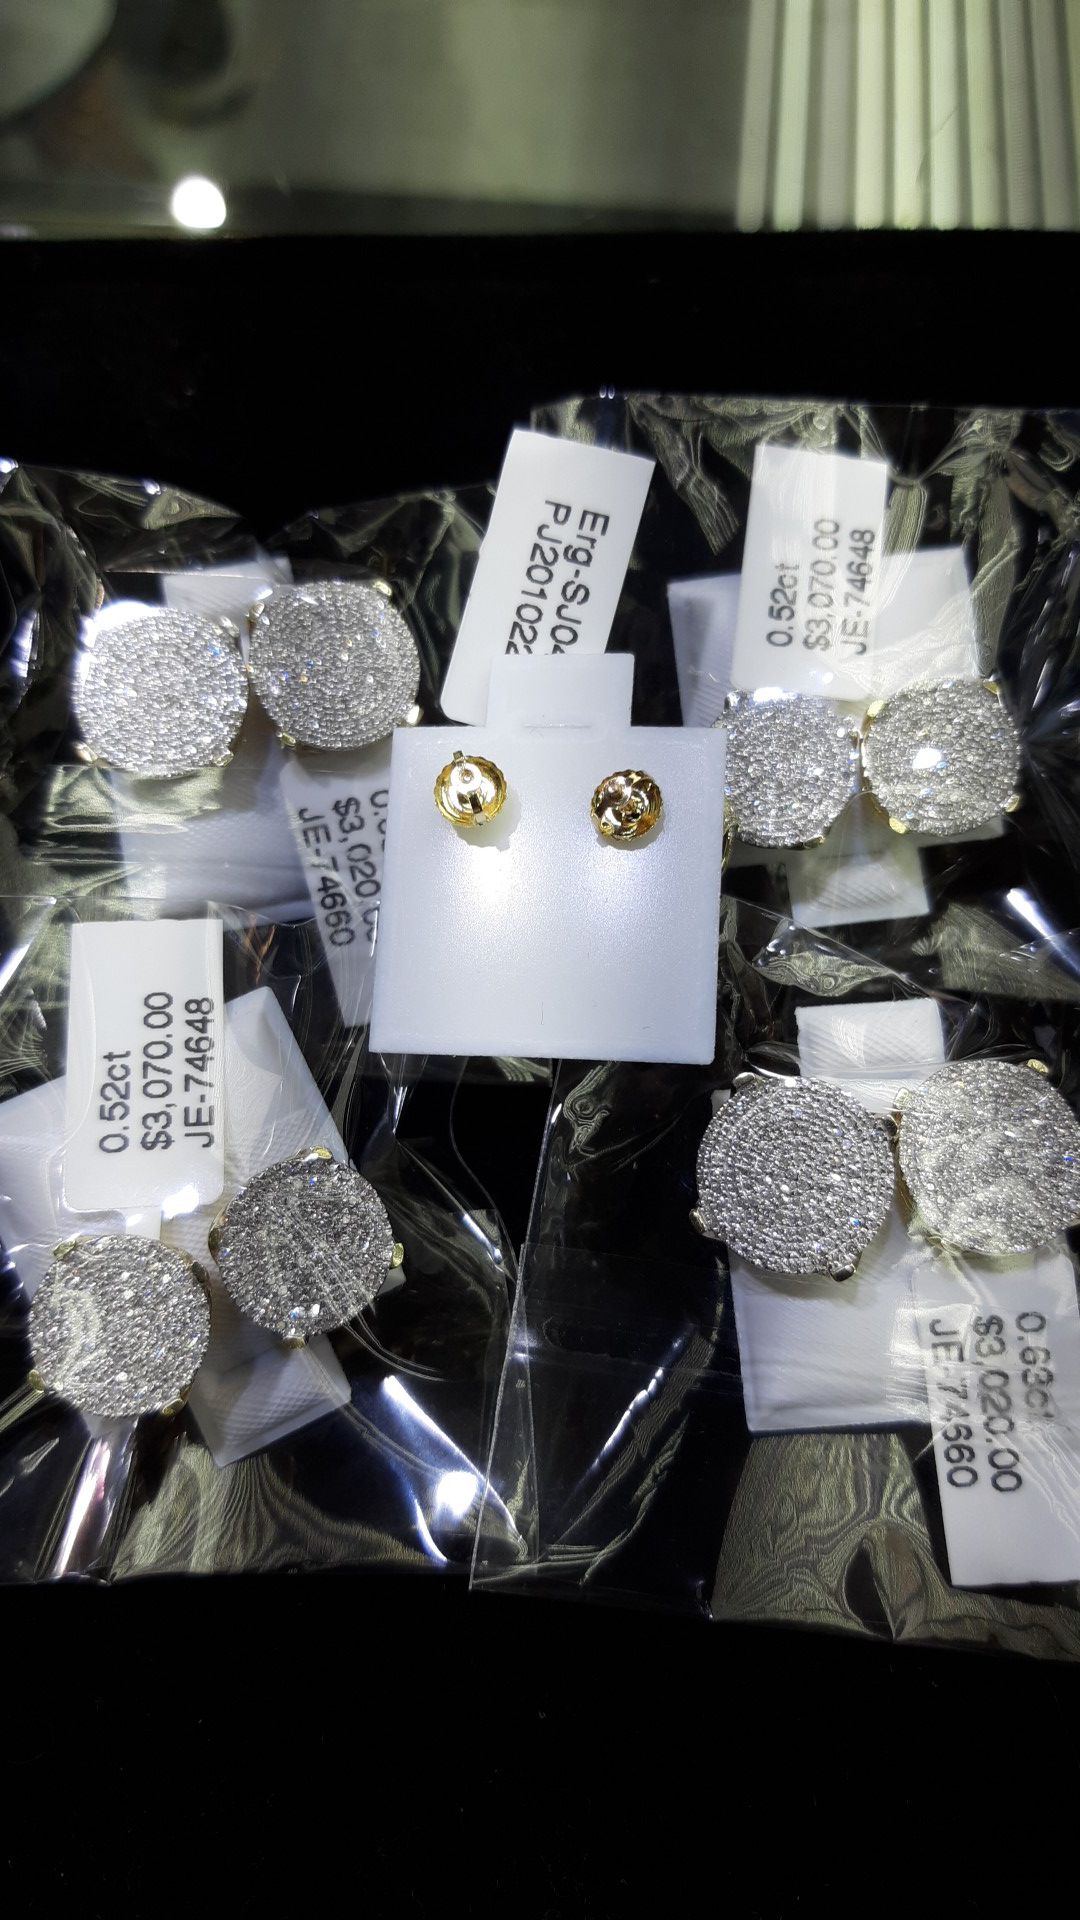 14k gold diamond earrings big size today special $800 each